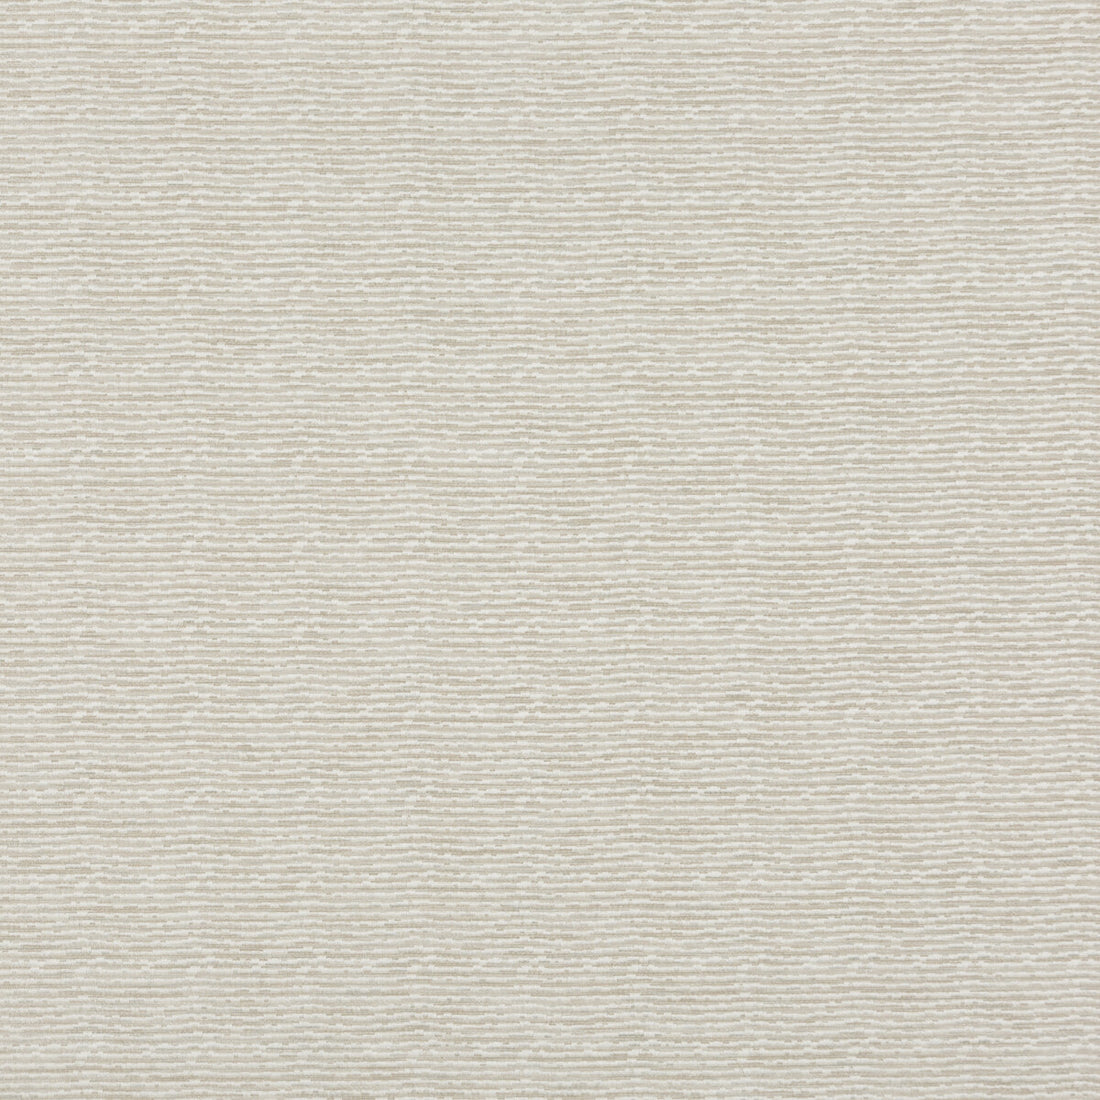 Esker fabric in pearl color - pattern BF10685.108.0 - by G P &amp; J Baker in the Essential Colours collection